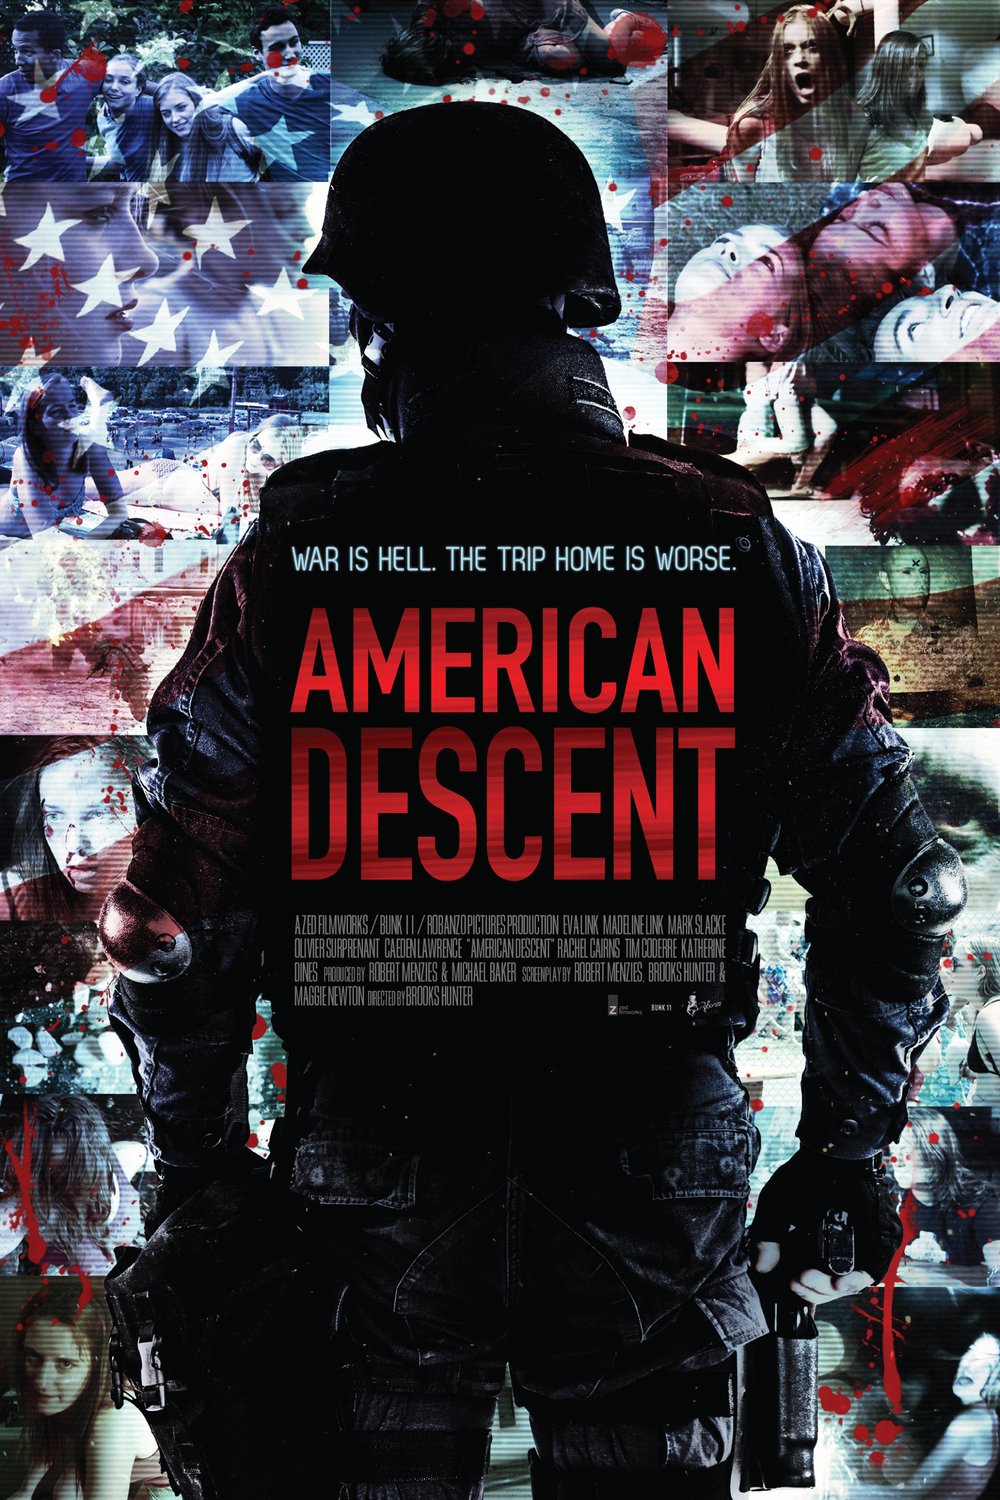 Poster of the movie American Descent